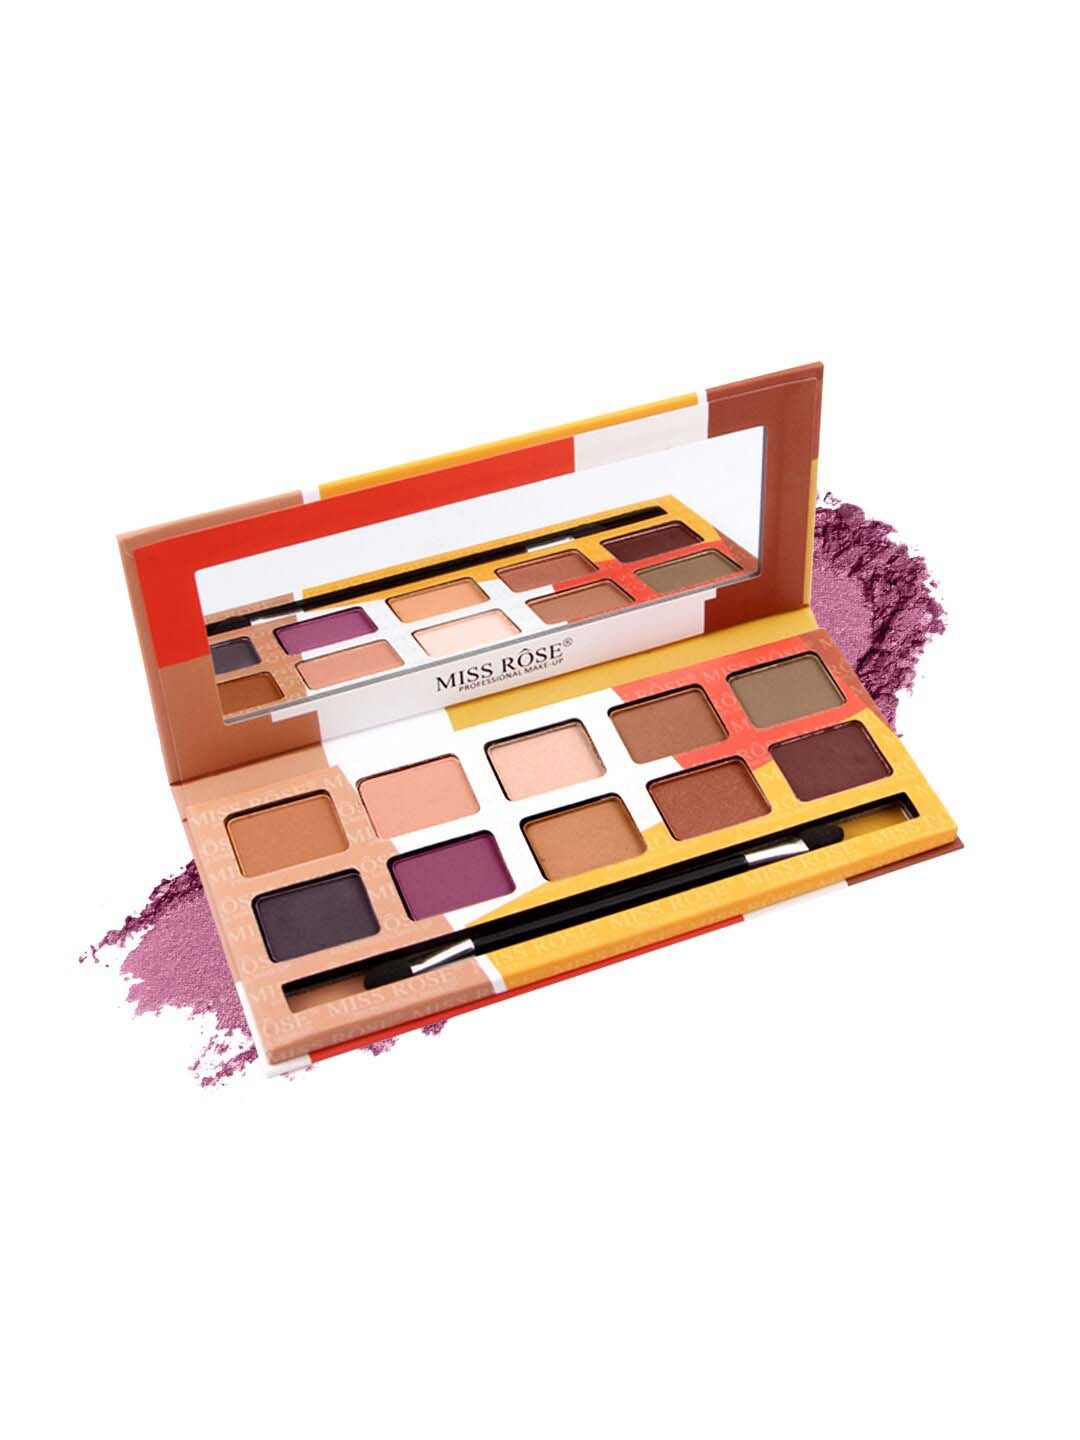 MISS ROSE 12 Color Nude Eyeshadow Palette 7001-051NY 02 Price in India